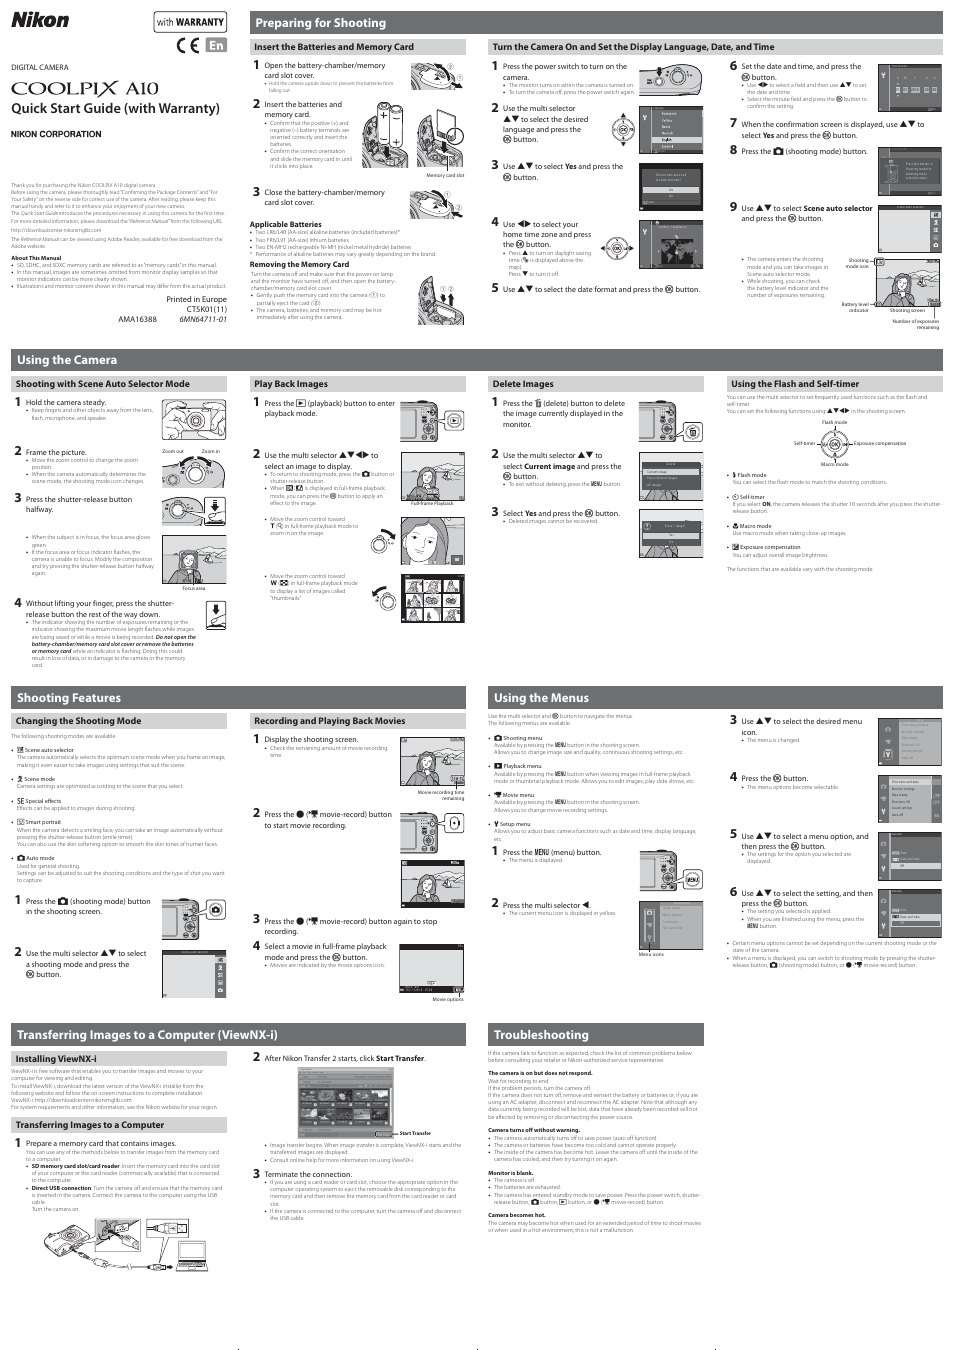 Nikon Coolpix A10 User Manual | 2 pages